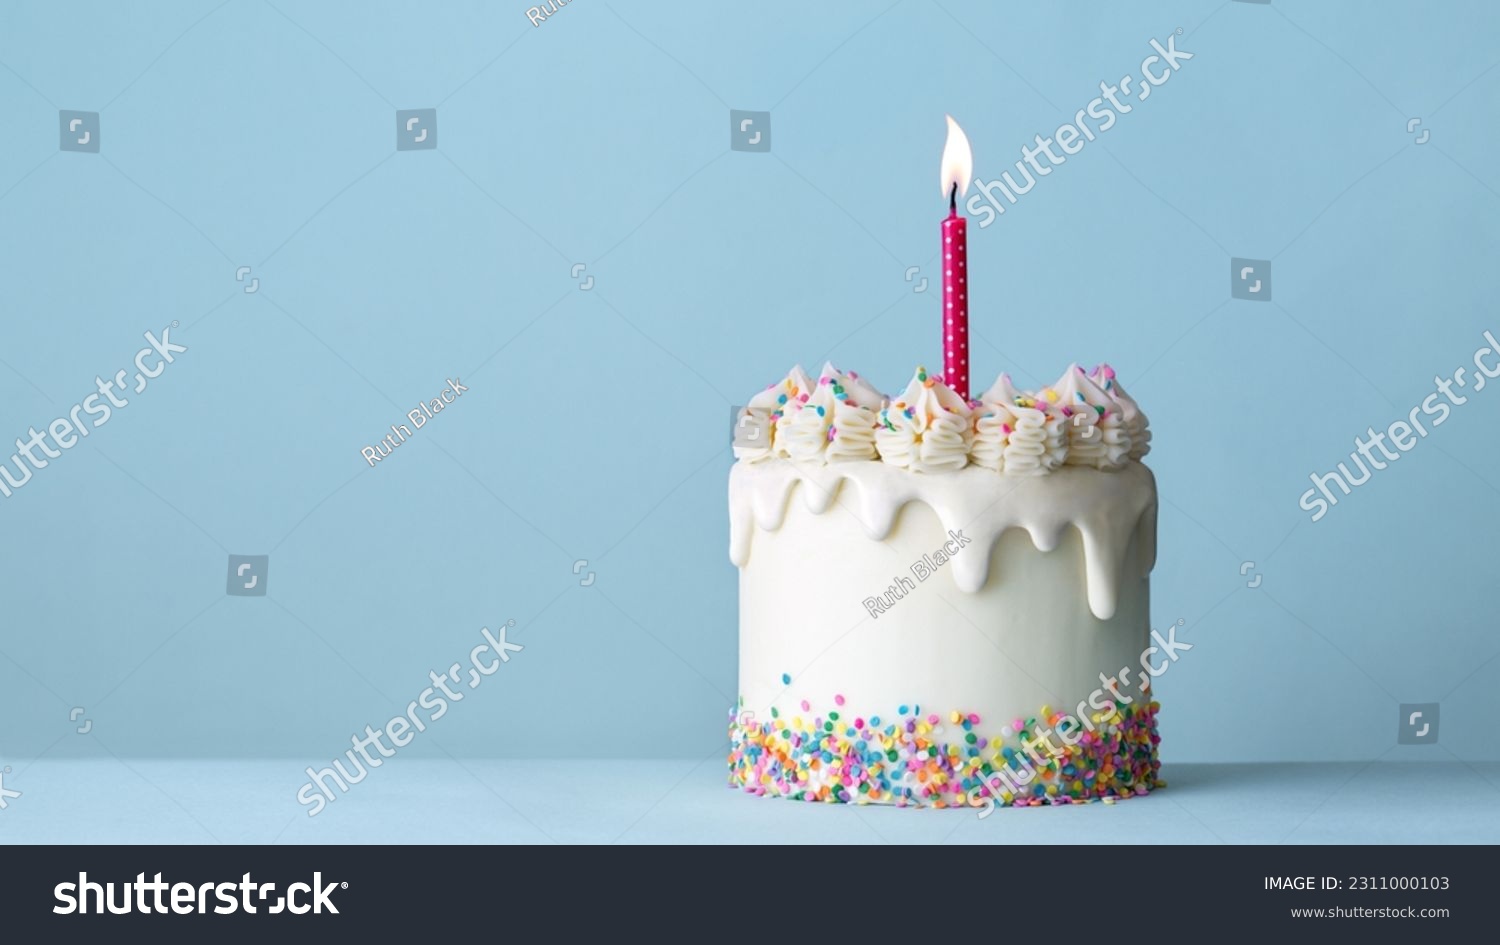 Celebration birthday cake decorated with white drip icing, buttercream frosting swirls, colorful sugar sprinkles and one birthday candle against a plain blue background #2311000103